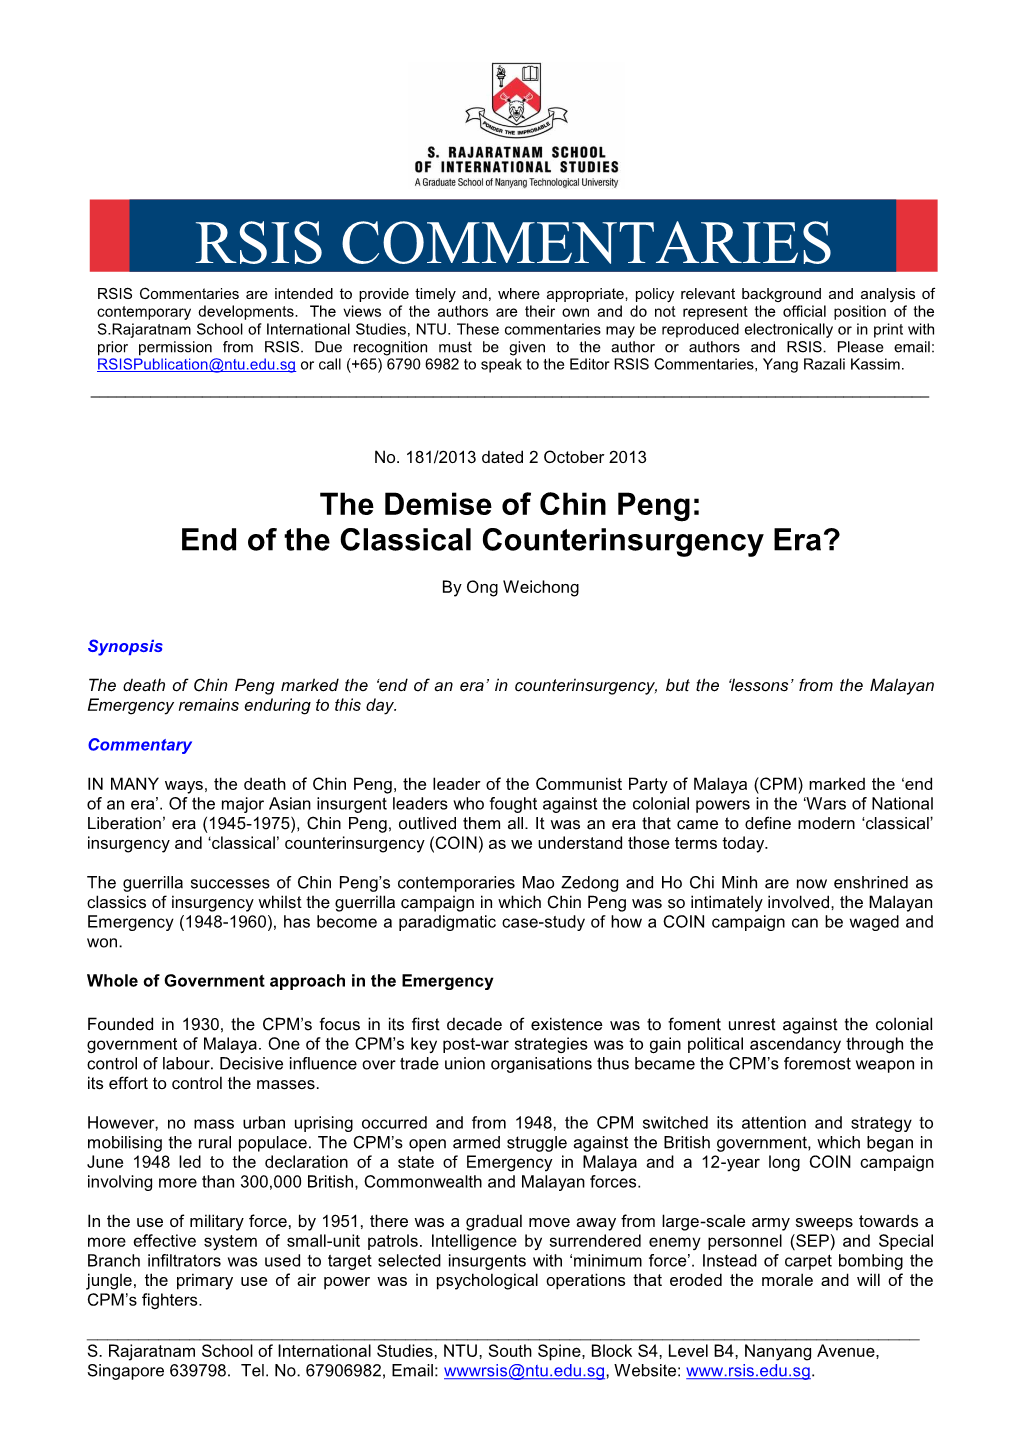 The Demise of Chin Peng: End of the Classical Counterinsurgency Era?